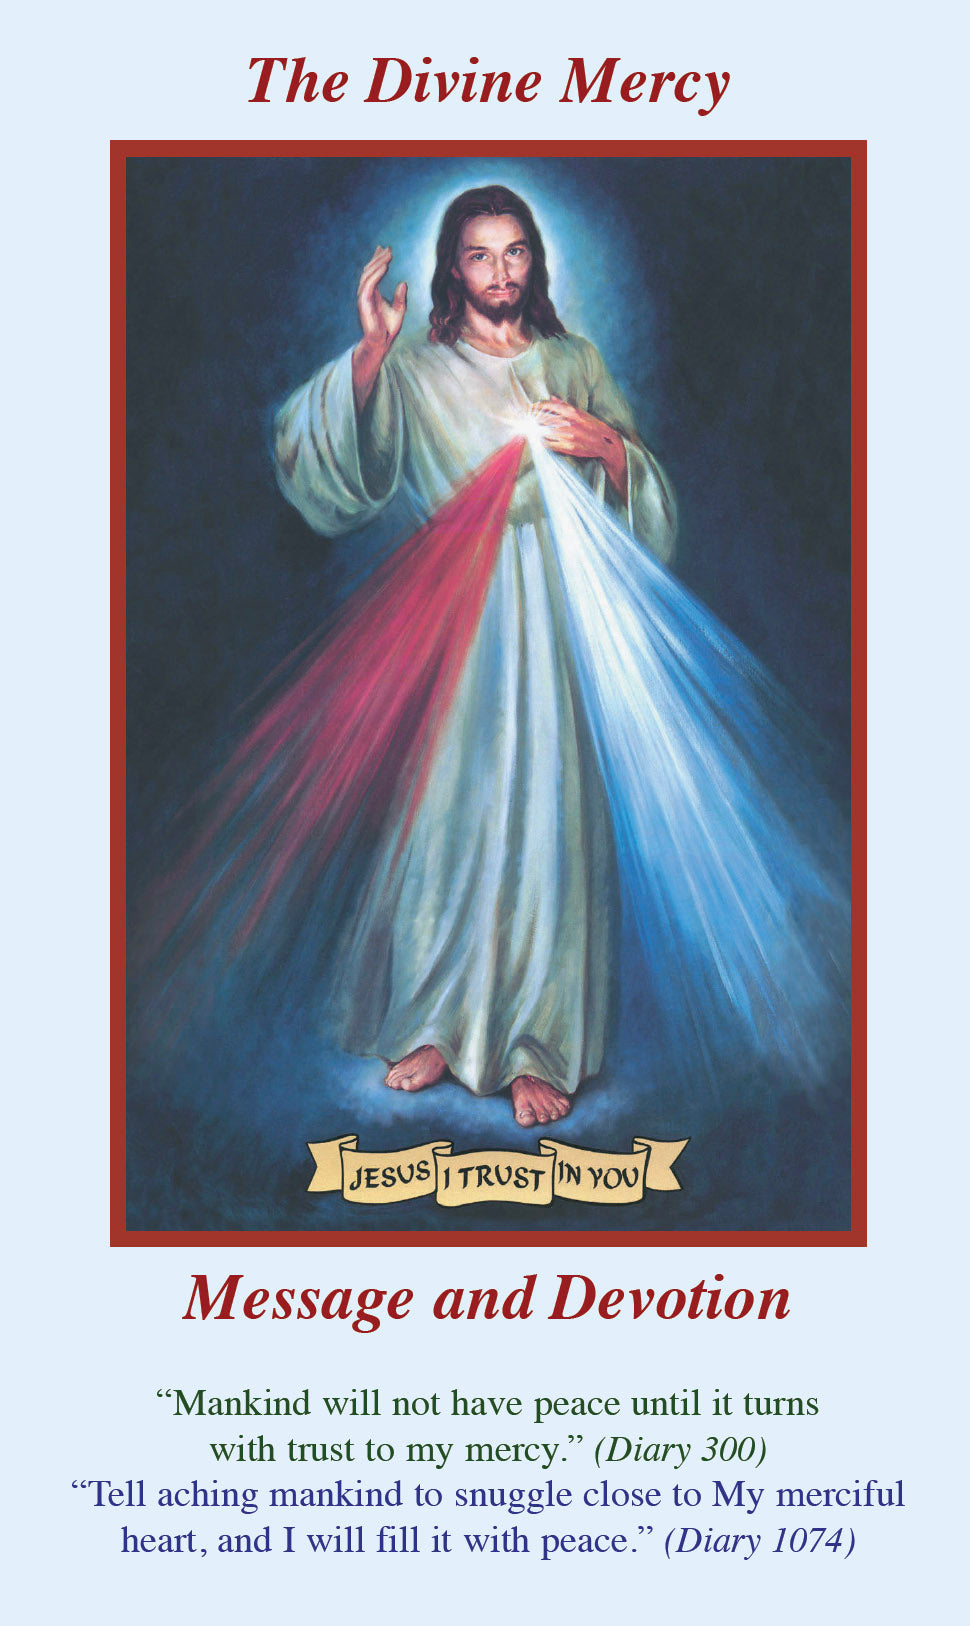 The Divine Mercy Message and Devotion (Paper Leaflet)